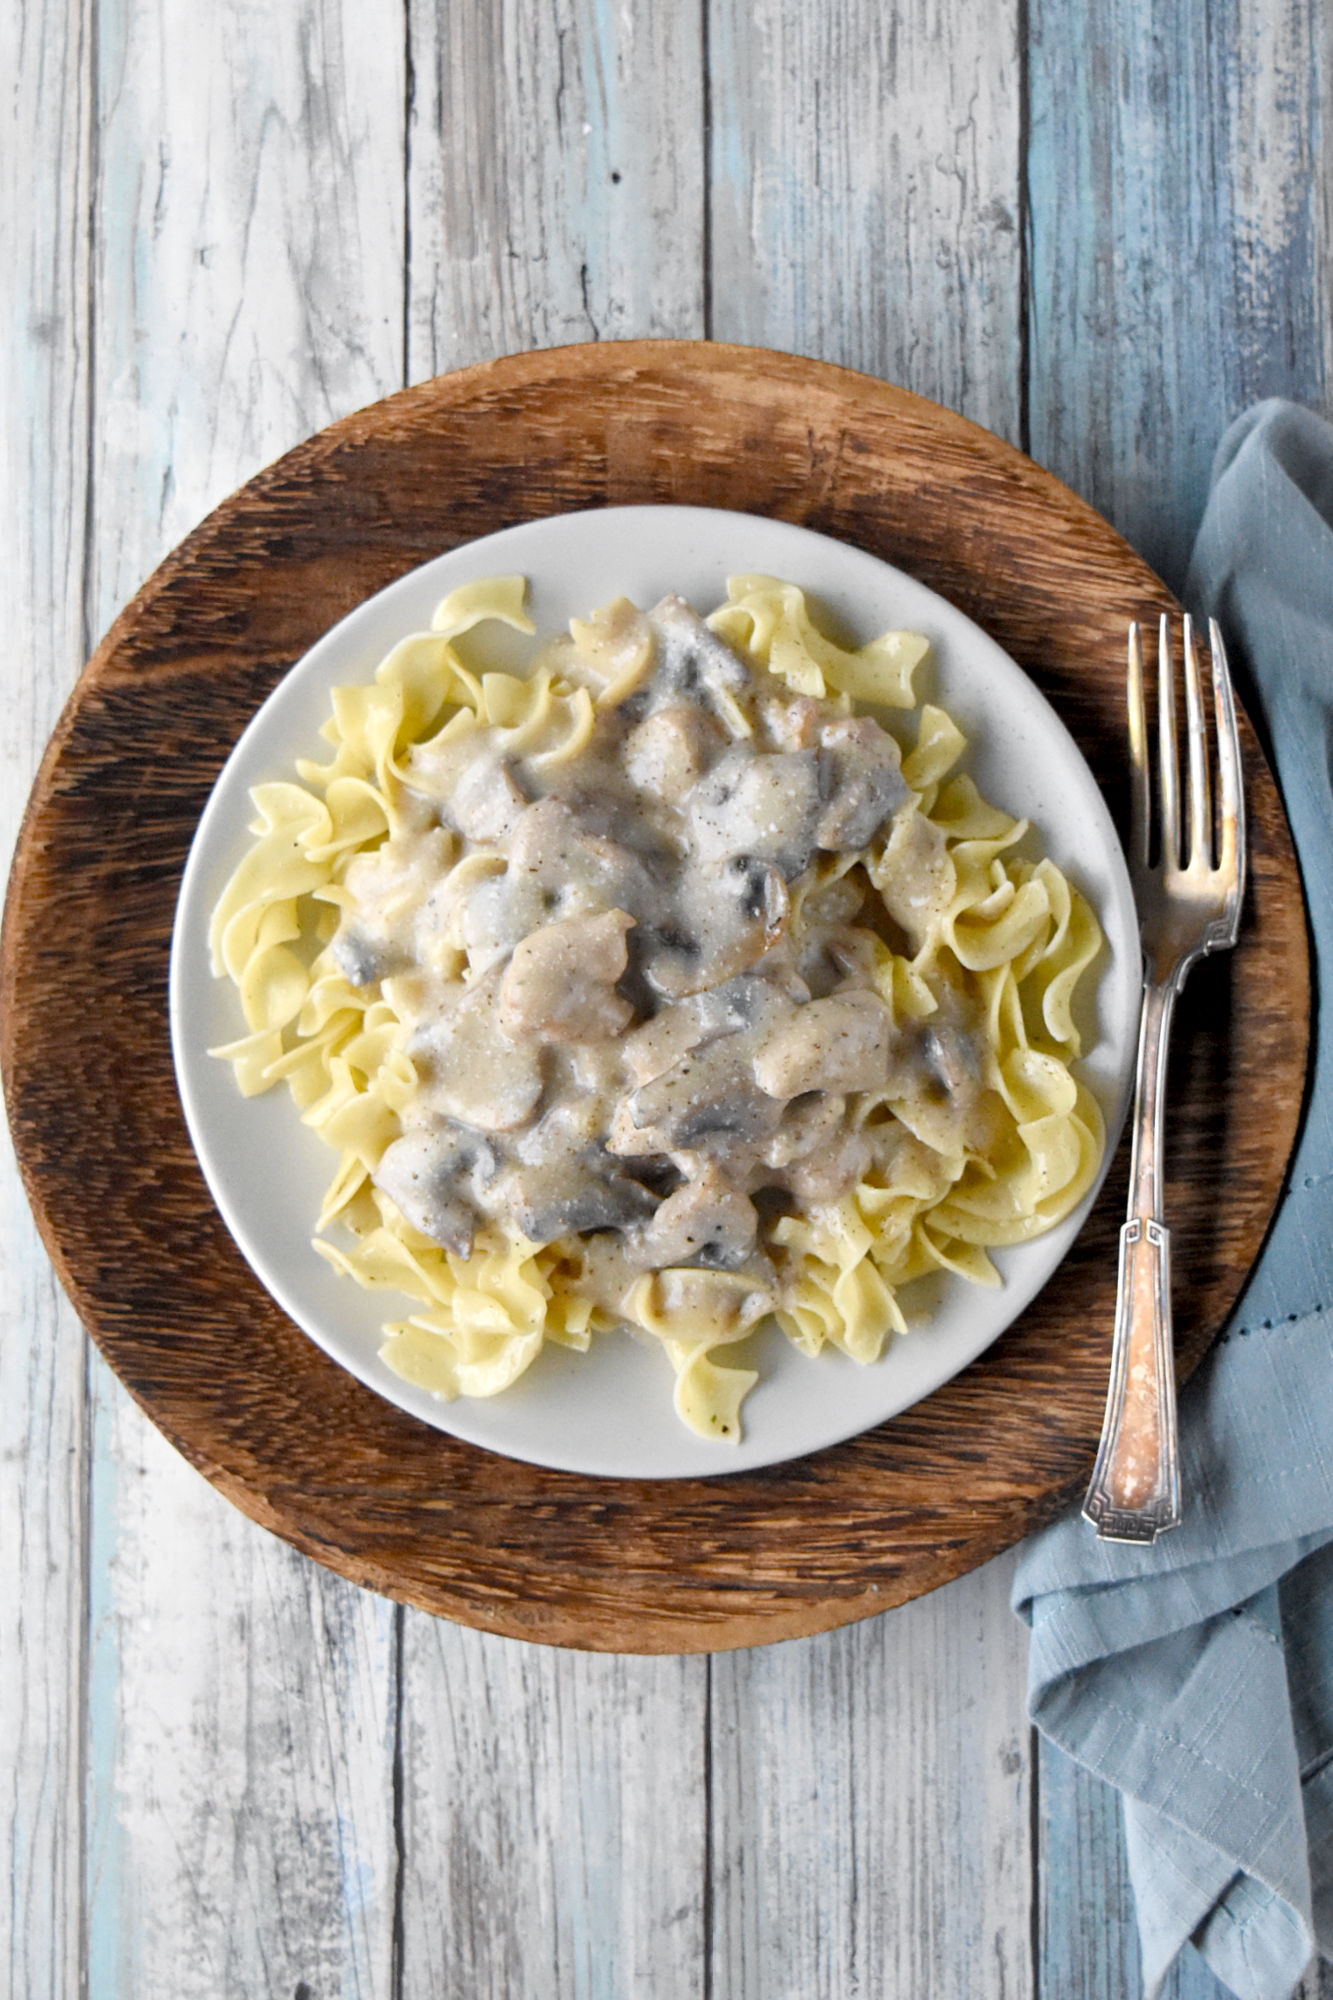 Easy Chicken Stroganoff is inspired by a dish I ate in Bosnia.  It's a delicious recipe your family will love.  And you'll love how easy it is to make! #OurFamilyTable #chickenrecipe #easyrecipe #comfortfood